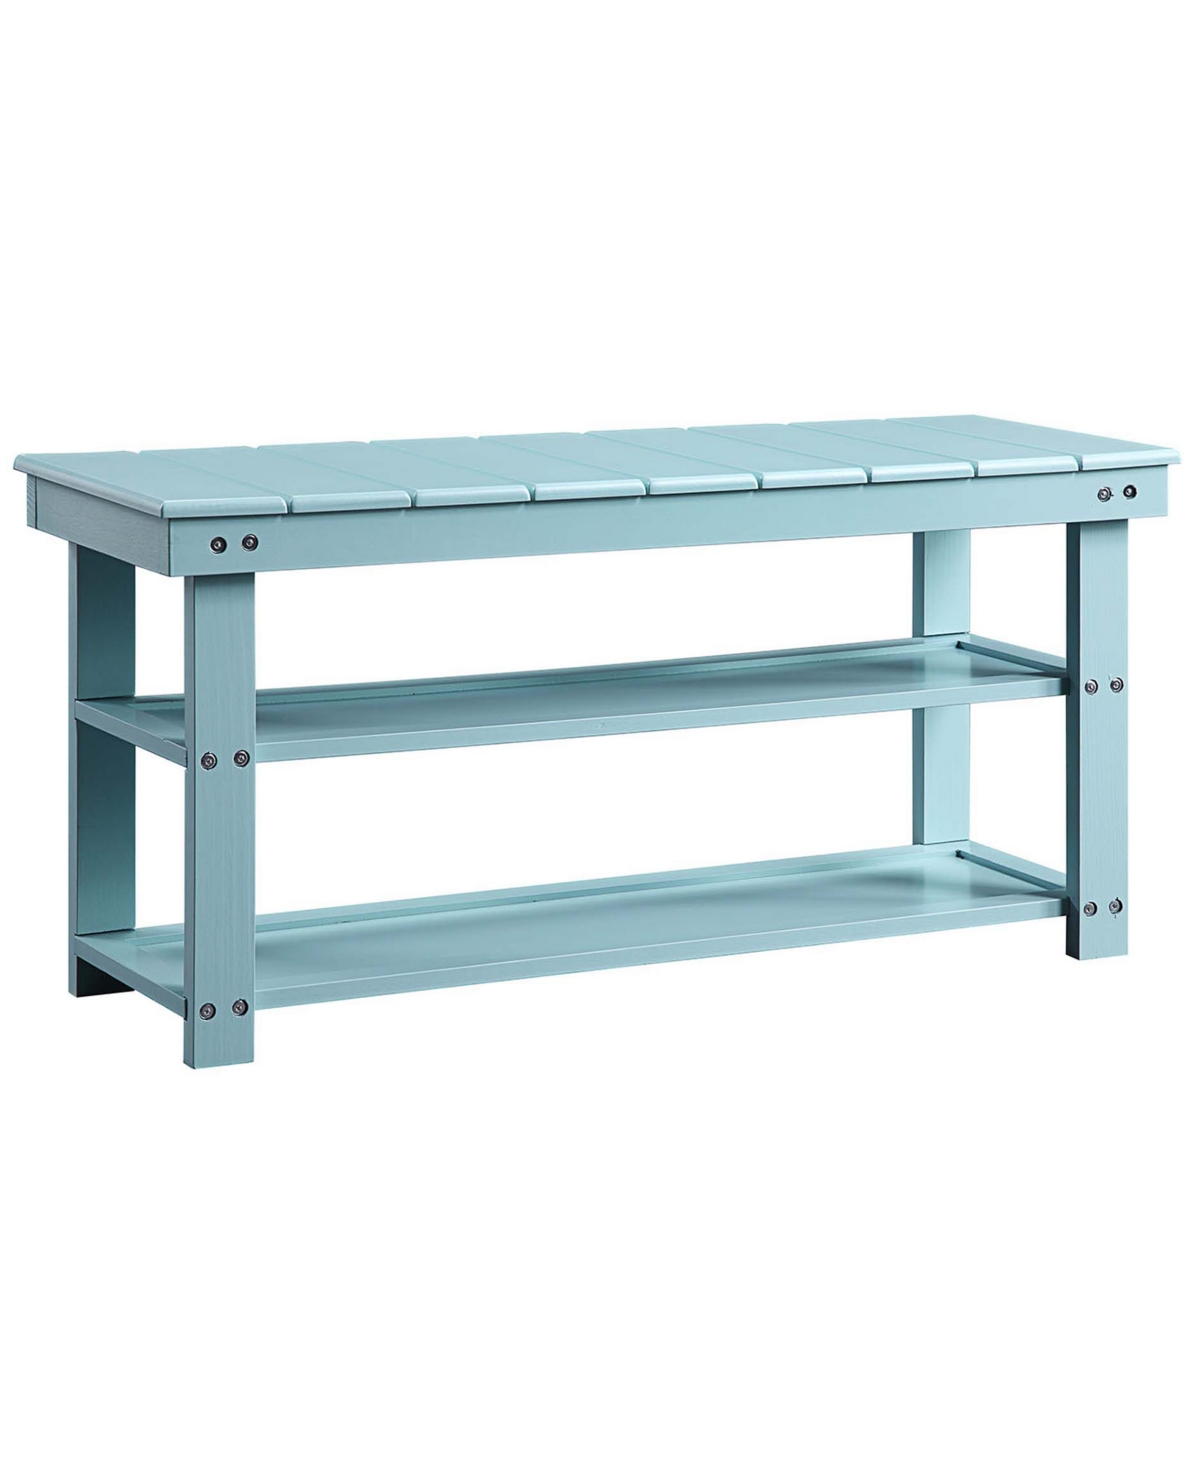 Convenience Concepts 35.5" Mdf Oxford Utility Mudroom Bench With Shelves In Sea Foam Blue